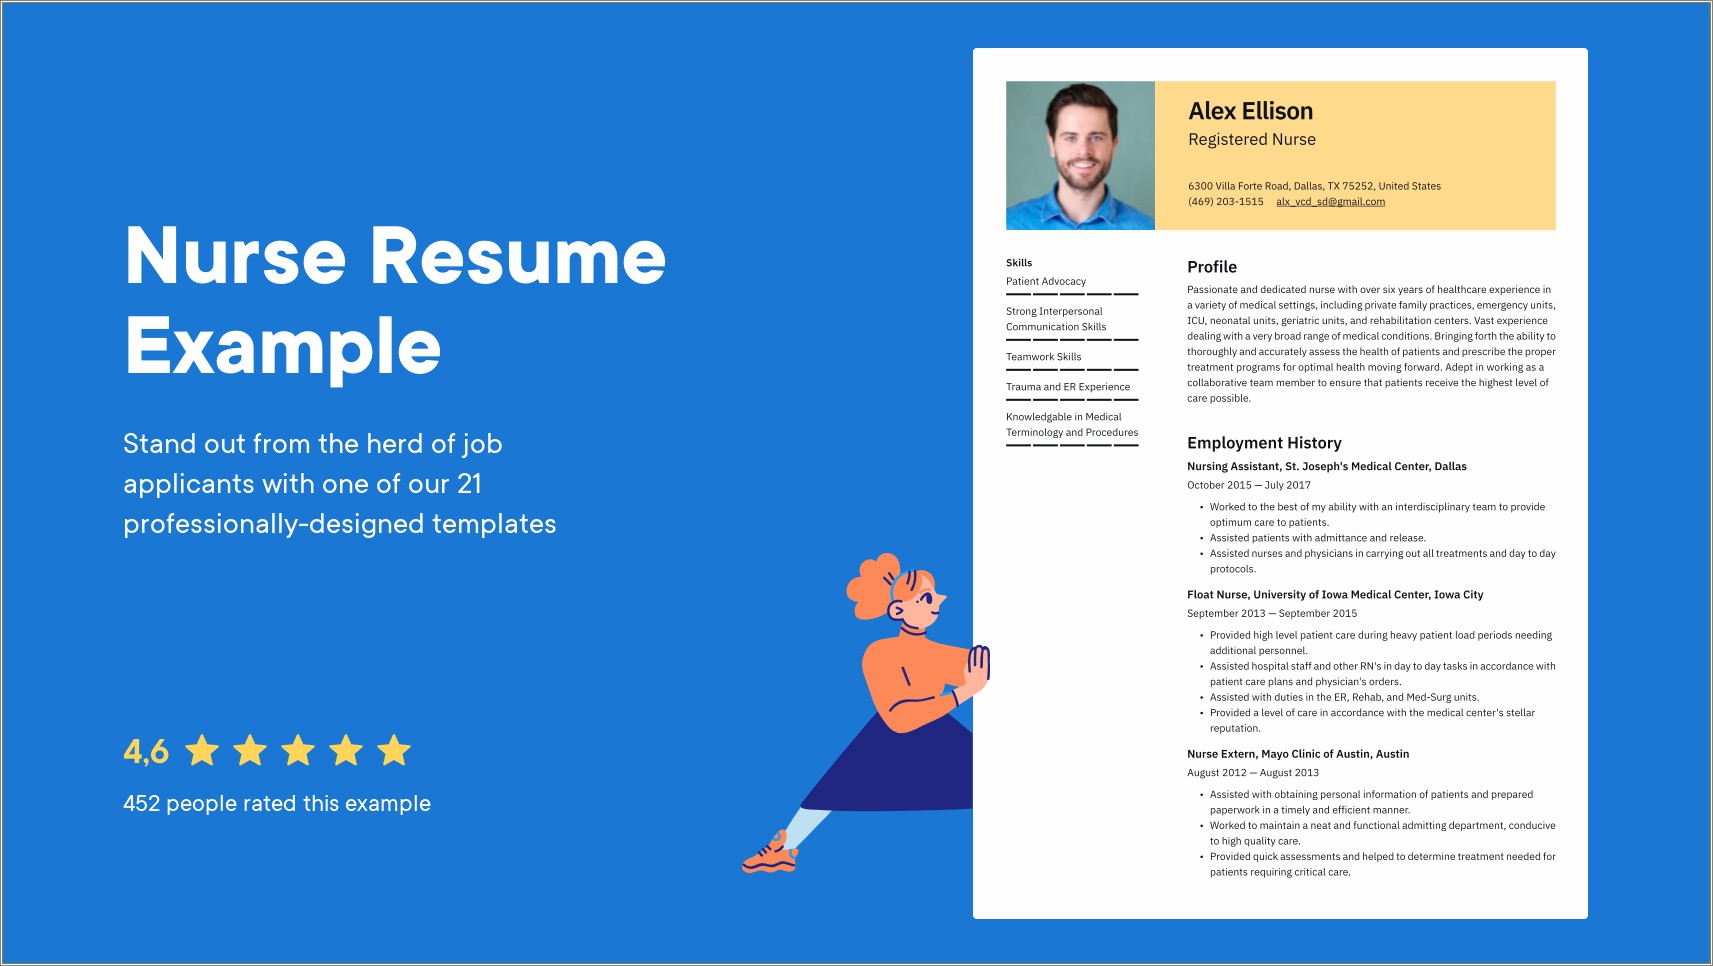 Nursing Resume With Only One Job